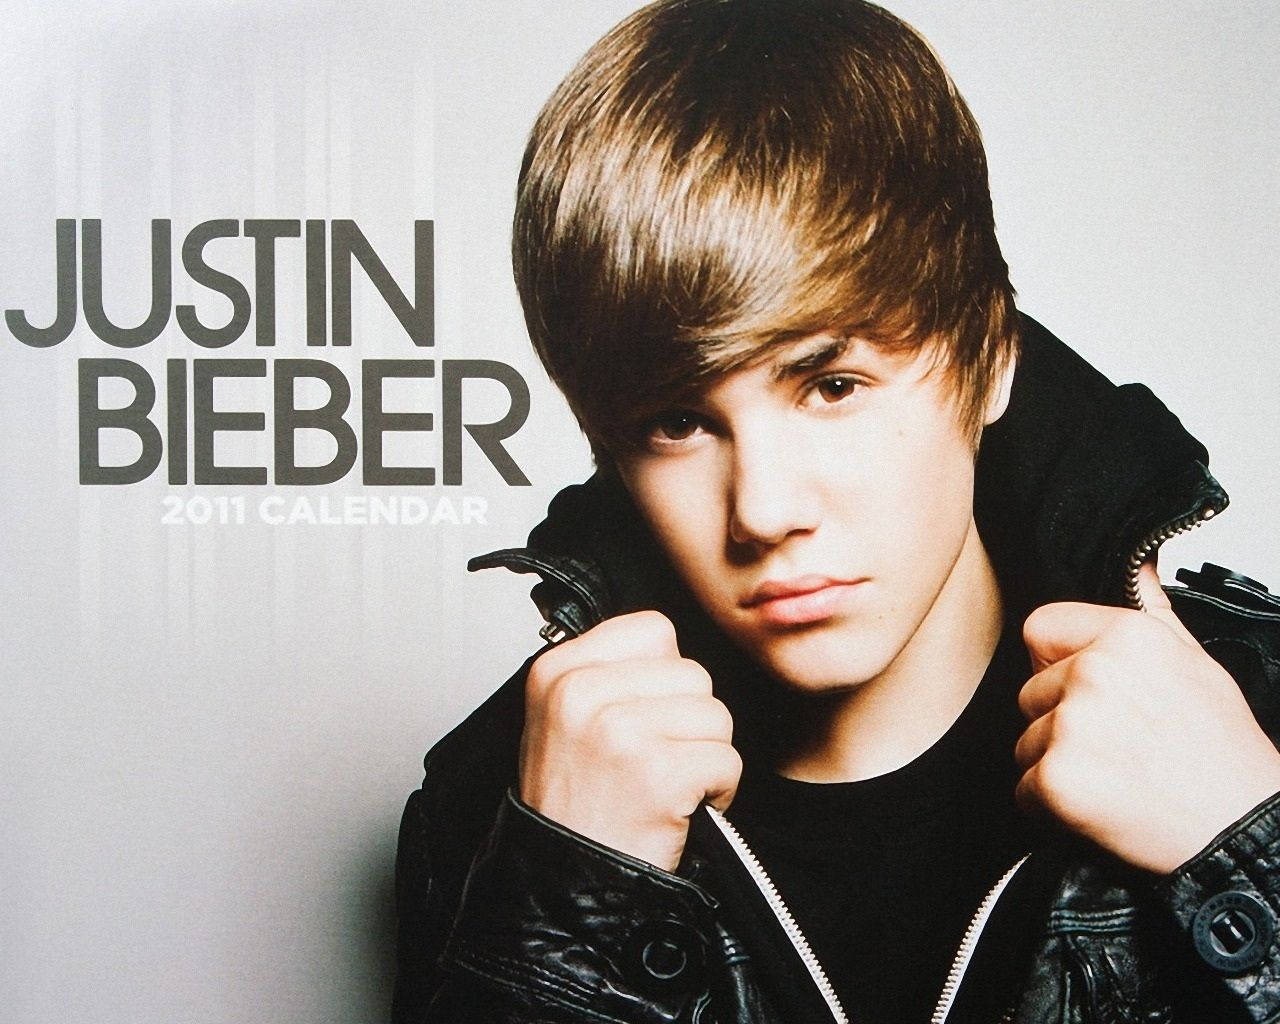 Justin Bieber Looking Casual And Cool For The 2011 Calendar Cover